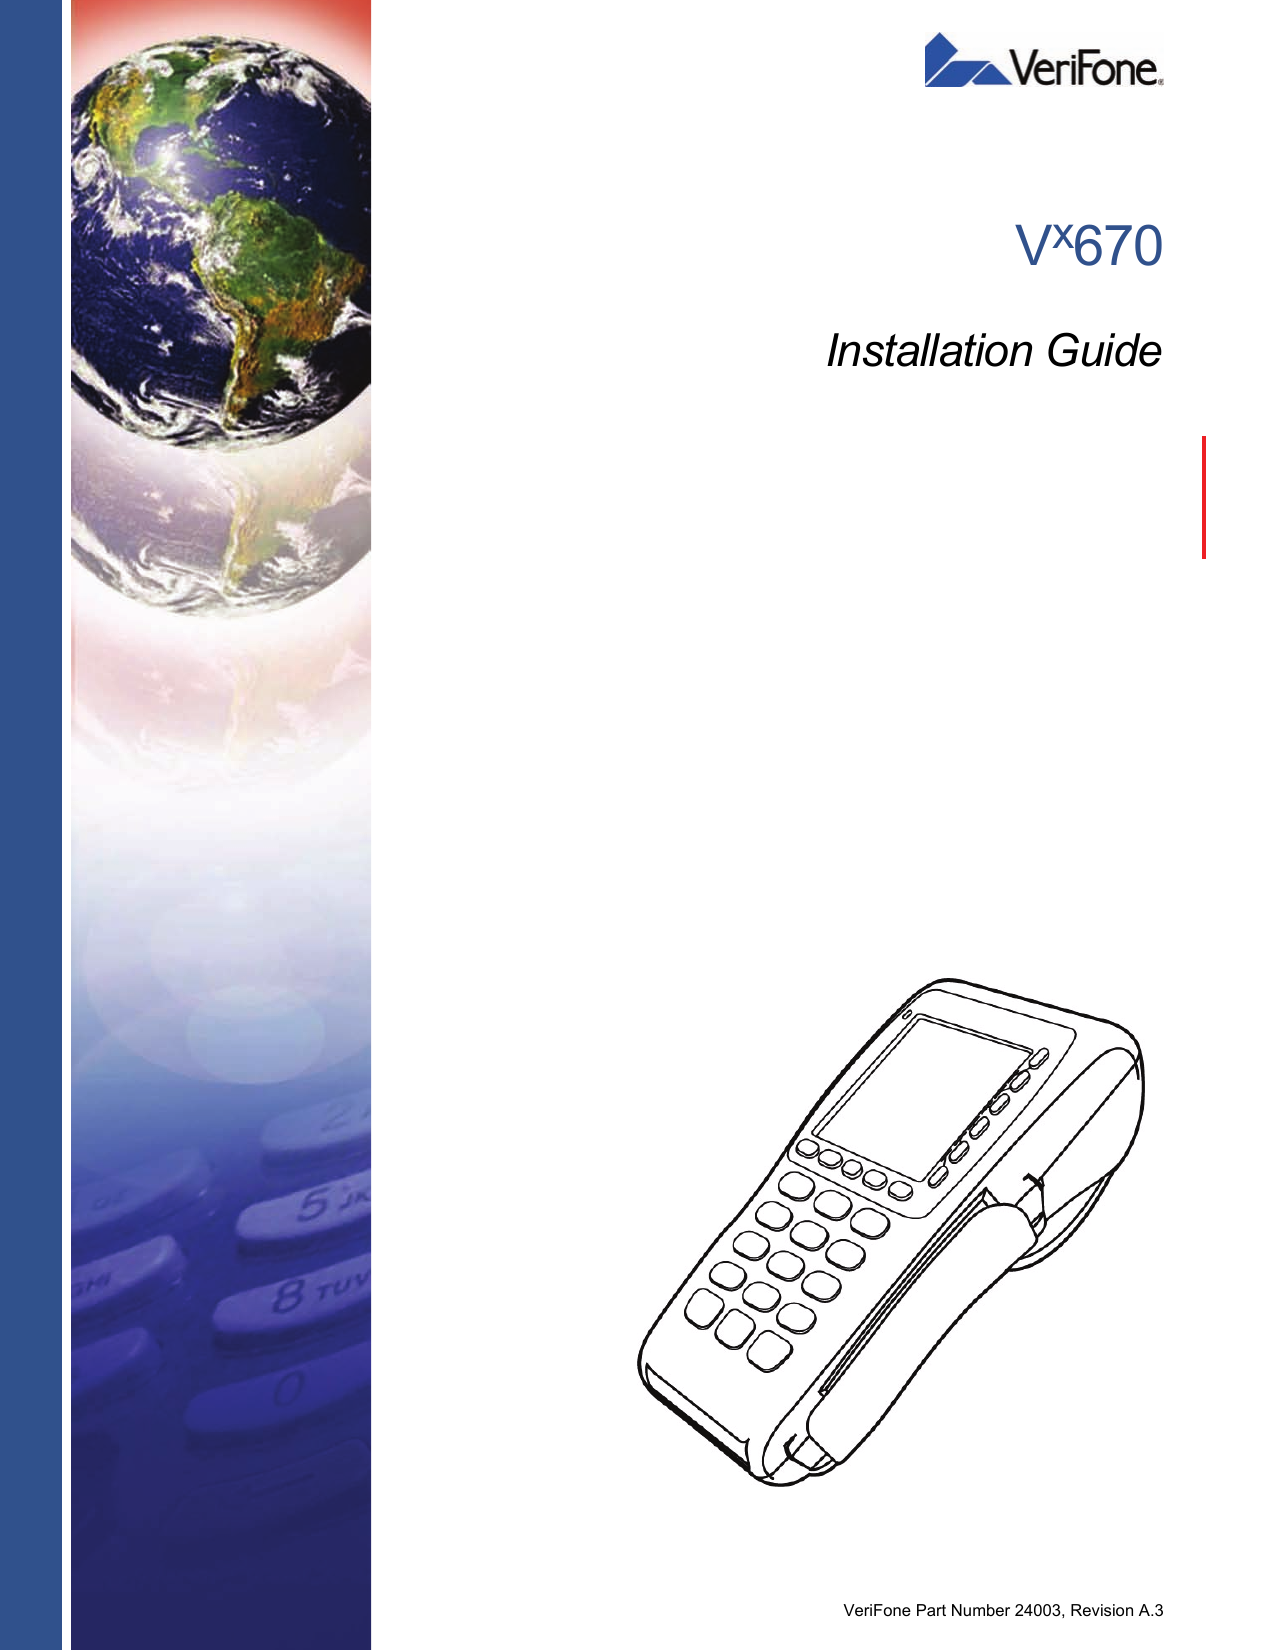 VeriFone Part Number 24003, Revision A.3Vx670Installation Guide